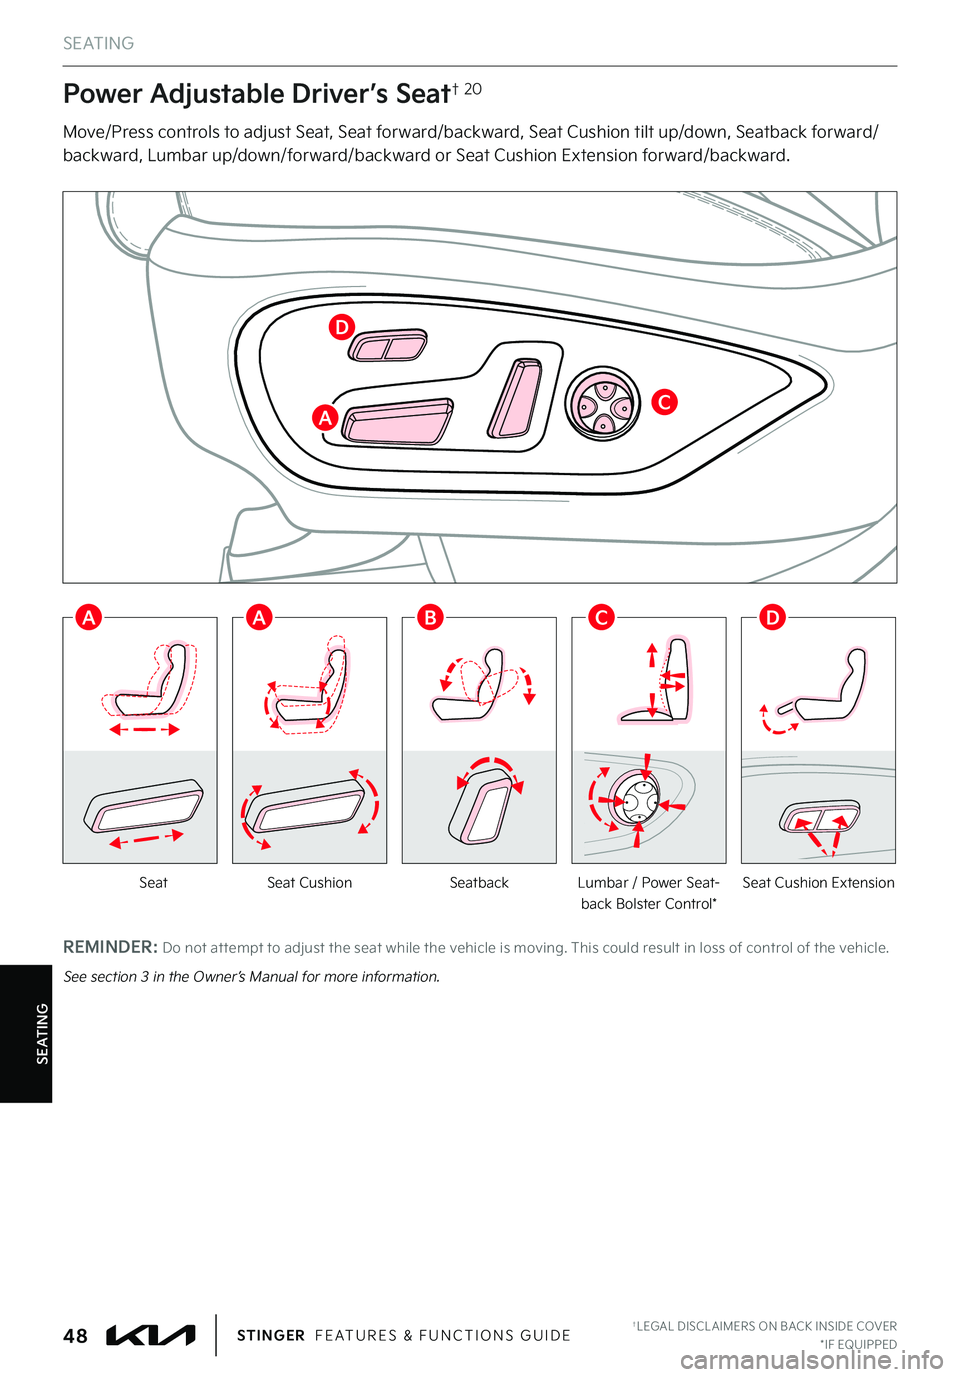 KIA STINGER 2022  Features and Functions Guide S E AT I N G
SeatbackLumbar / Power Seat-back Bolster Control*Seat Cushion ExtensionSeatSeat Cushion
Power Adjustable Driver’s Seat† 20
Move/Press controls to adjust Seat, Seat forward/backward, S